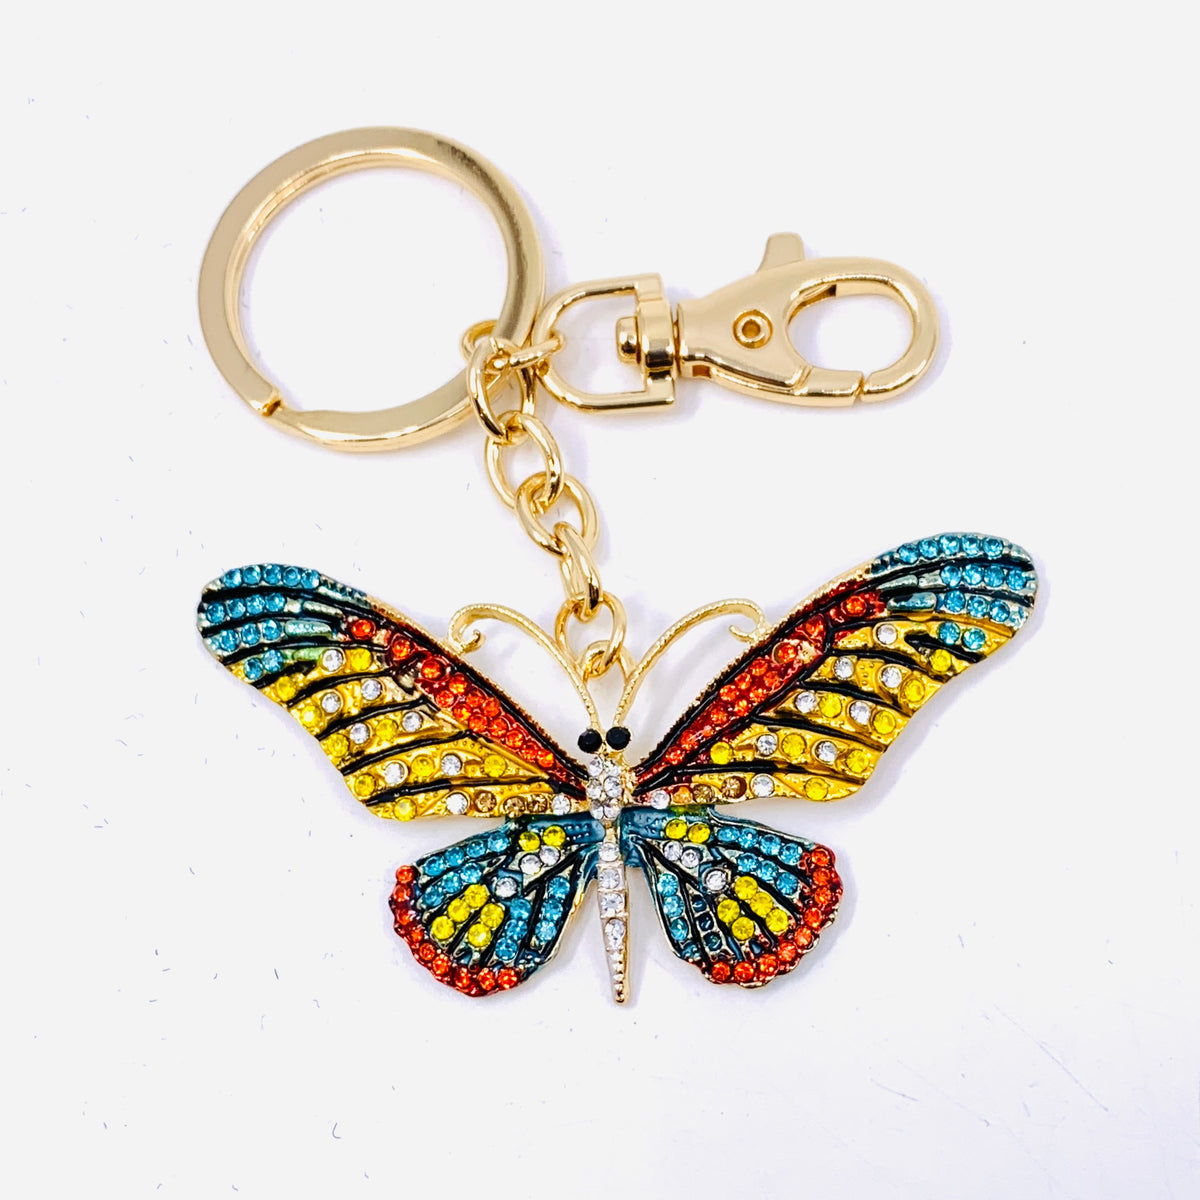 Bejeweled Key Chain 7, Butterfly